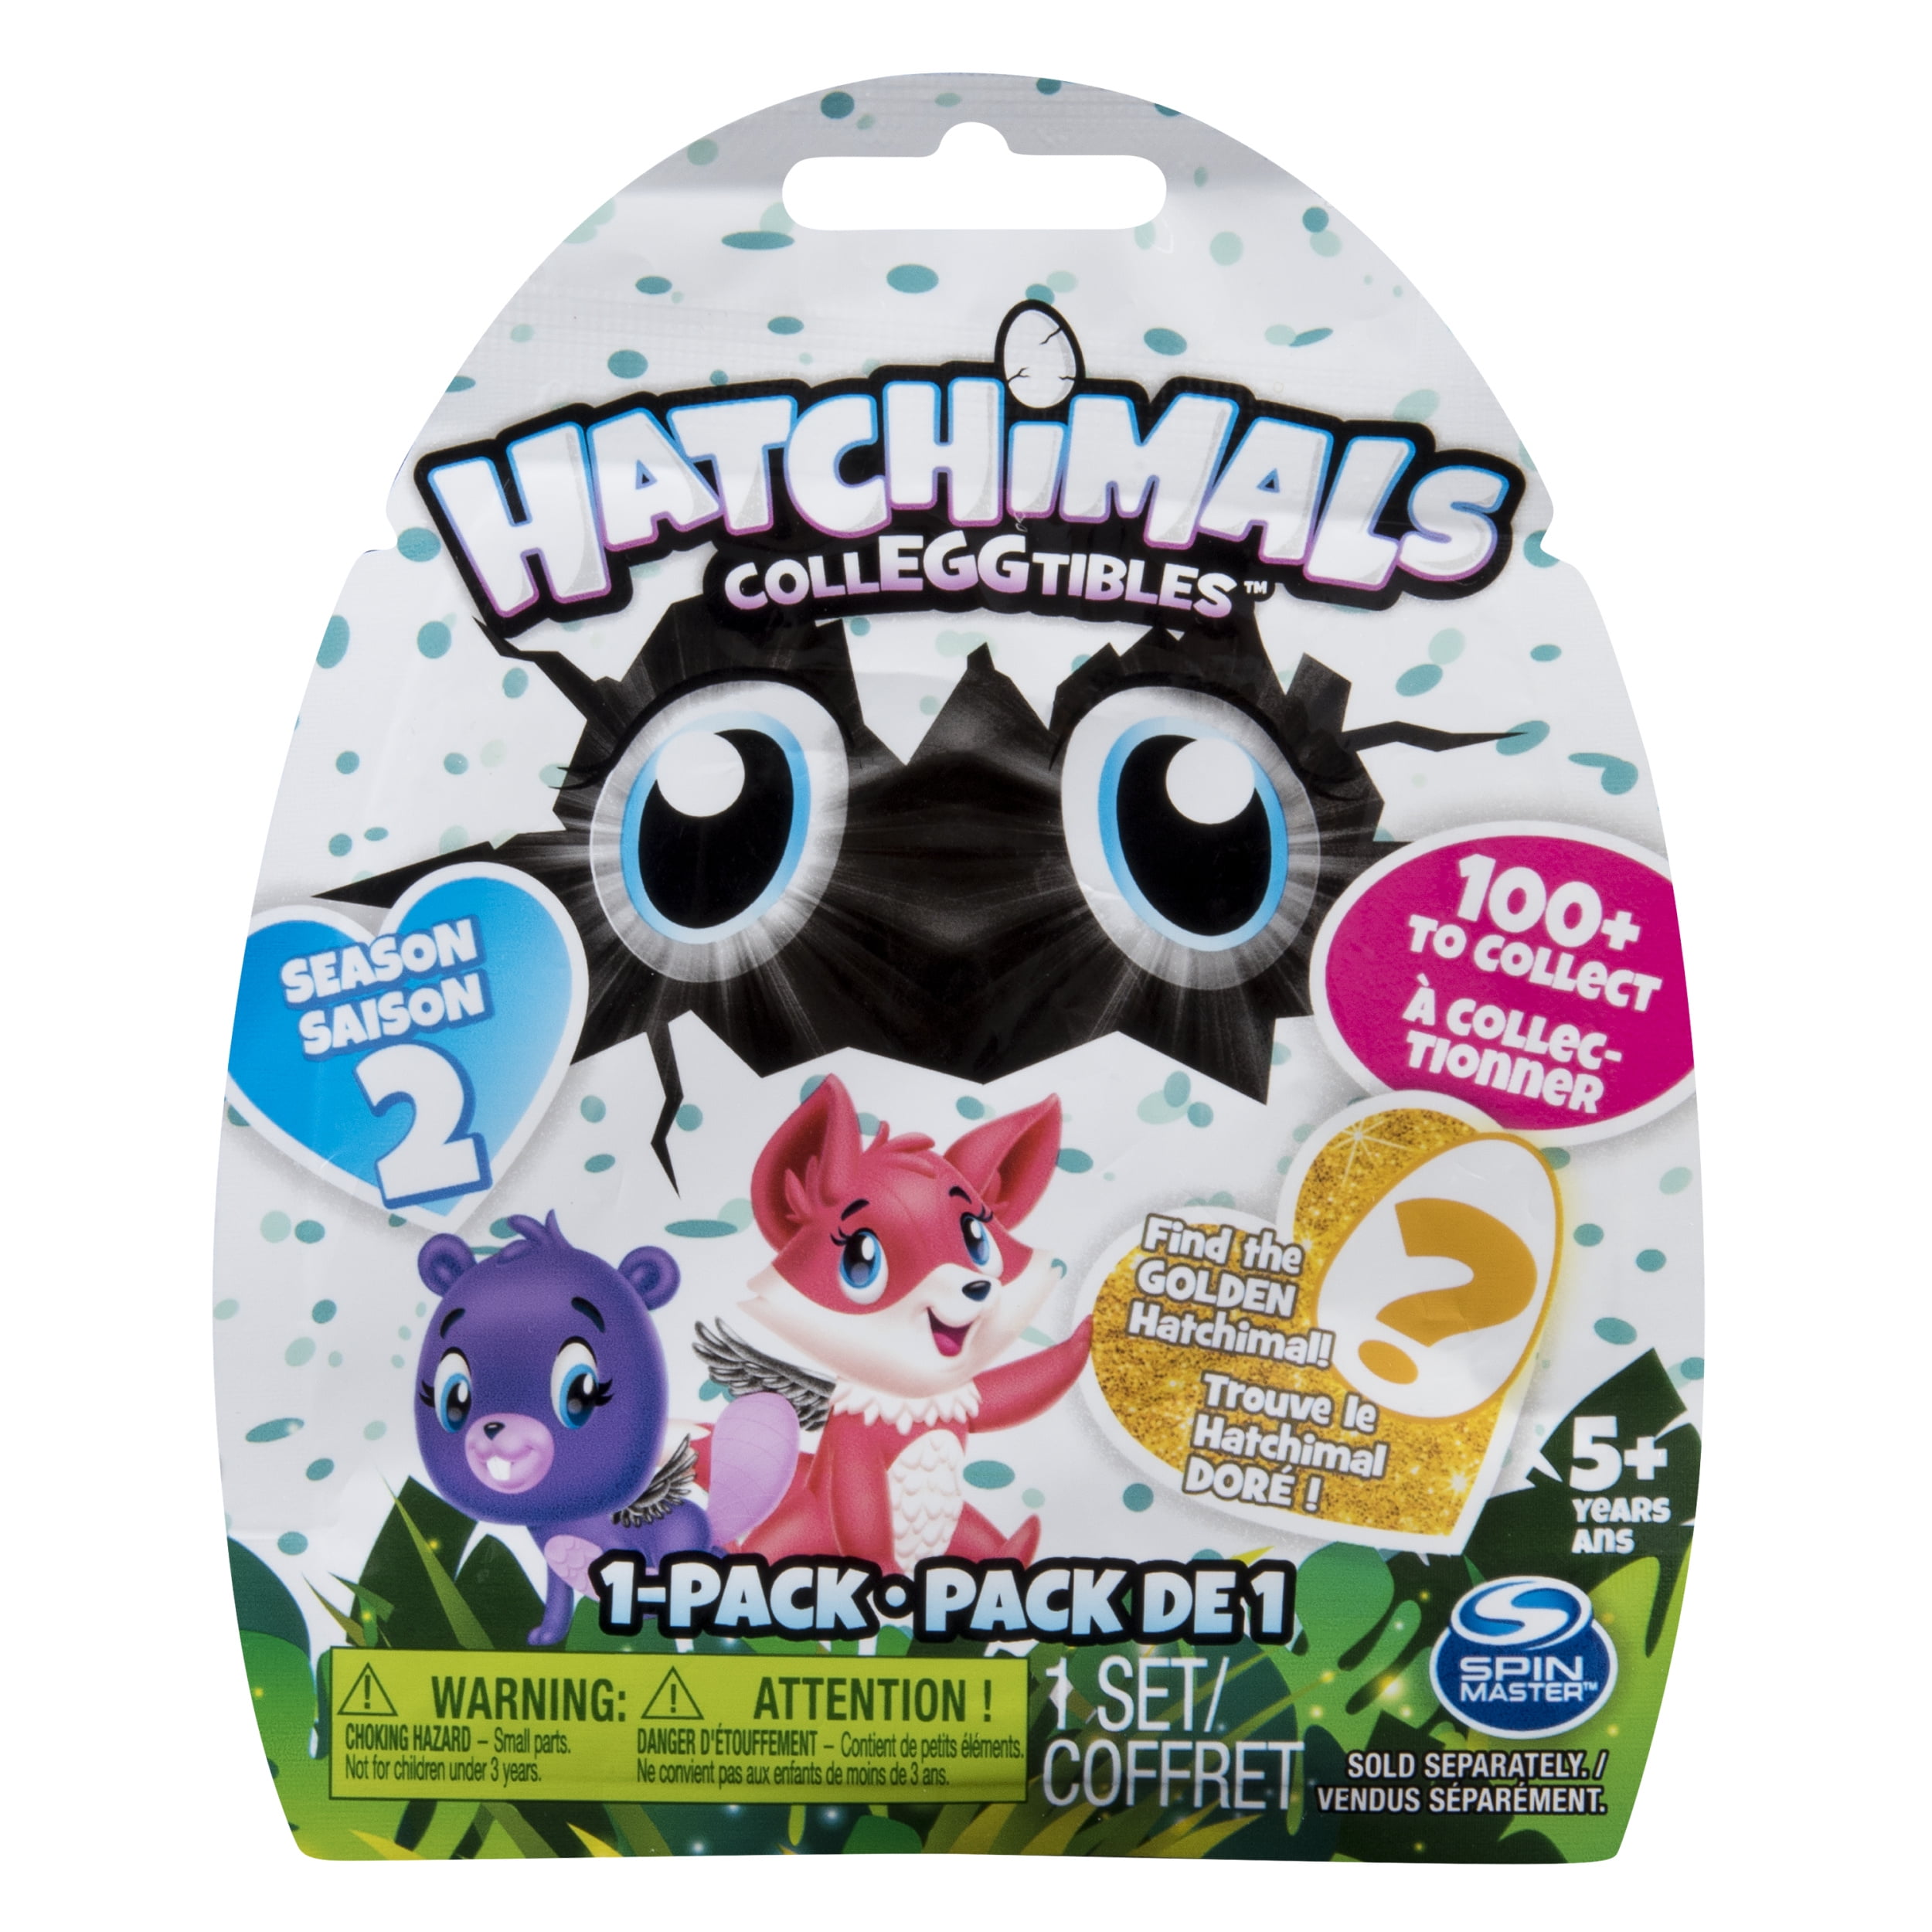 Pack Of 2 Hatchimals 6041329  Colleggtibles With Nest Playset Spinmaster Toy 